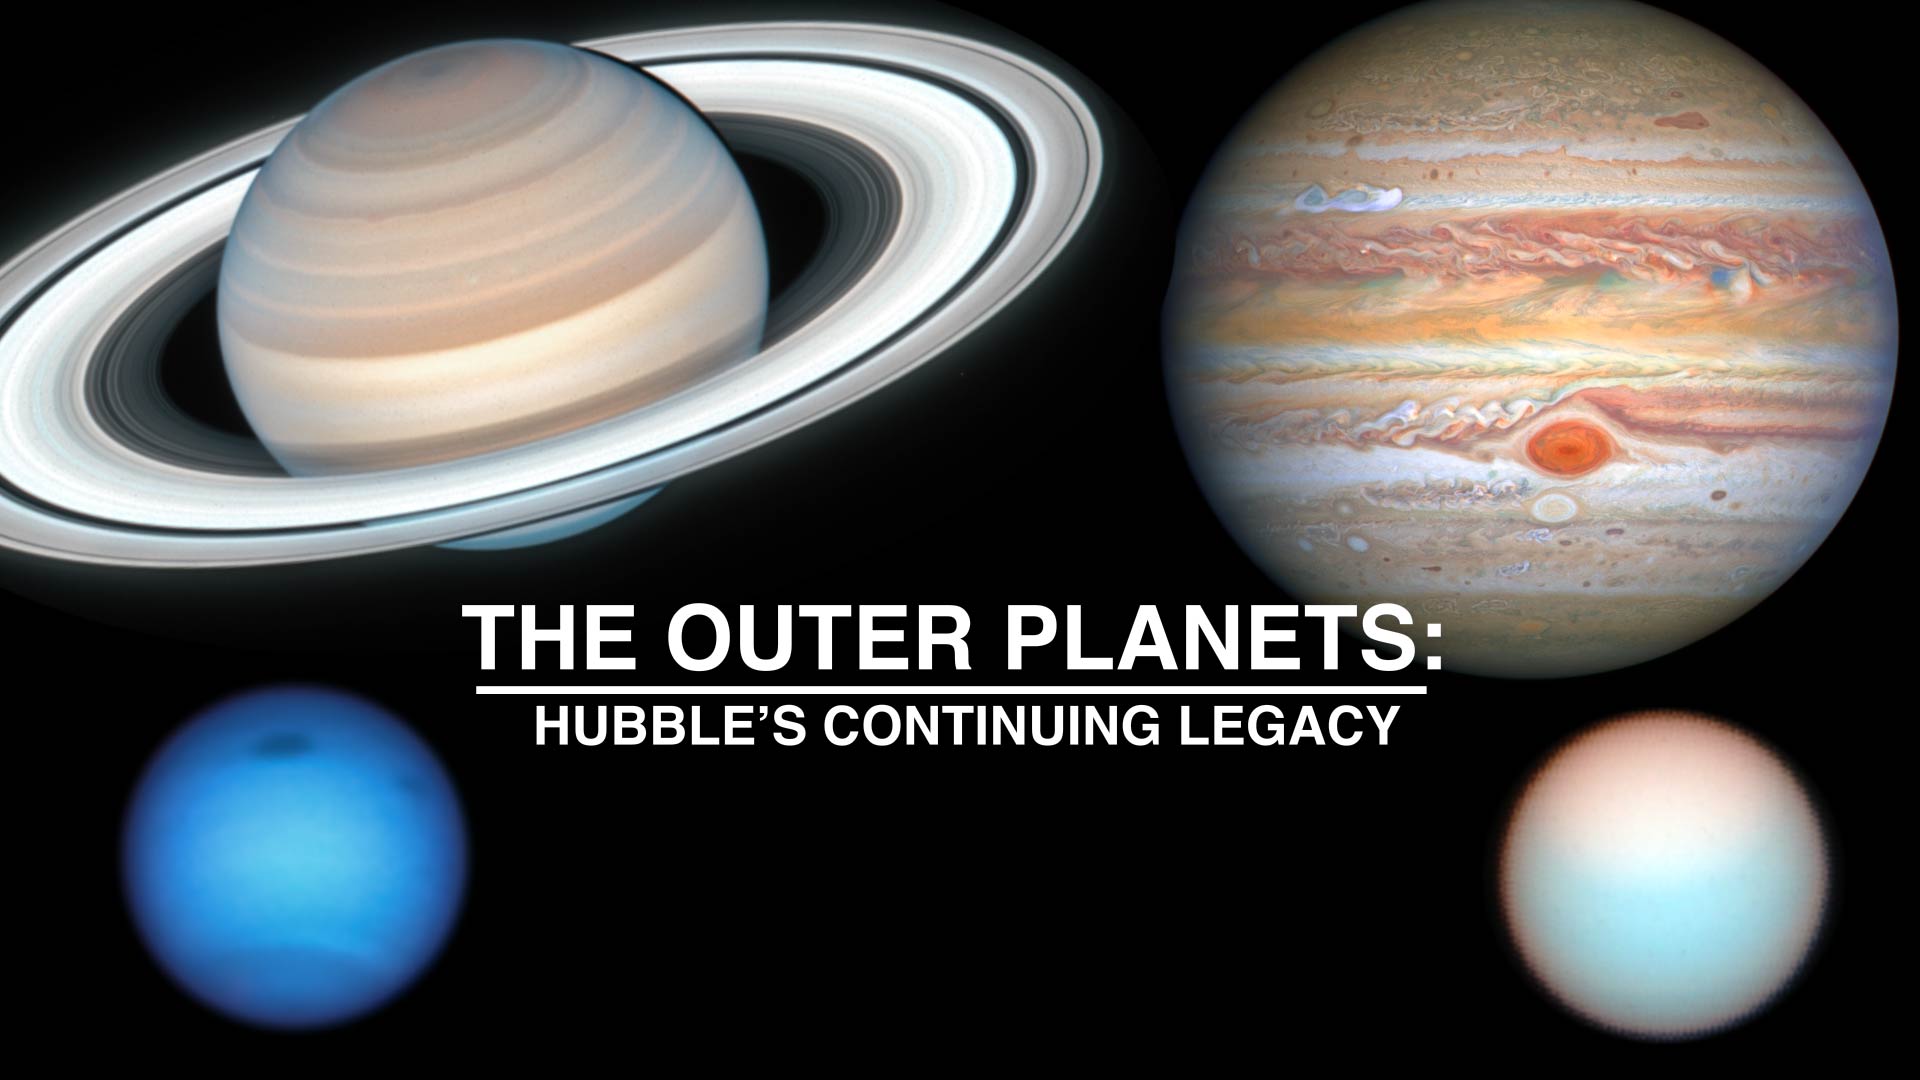 Preview Image for The Outer Planets: Hubble’s Continuing Legacy